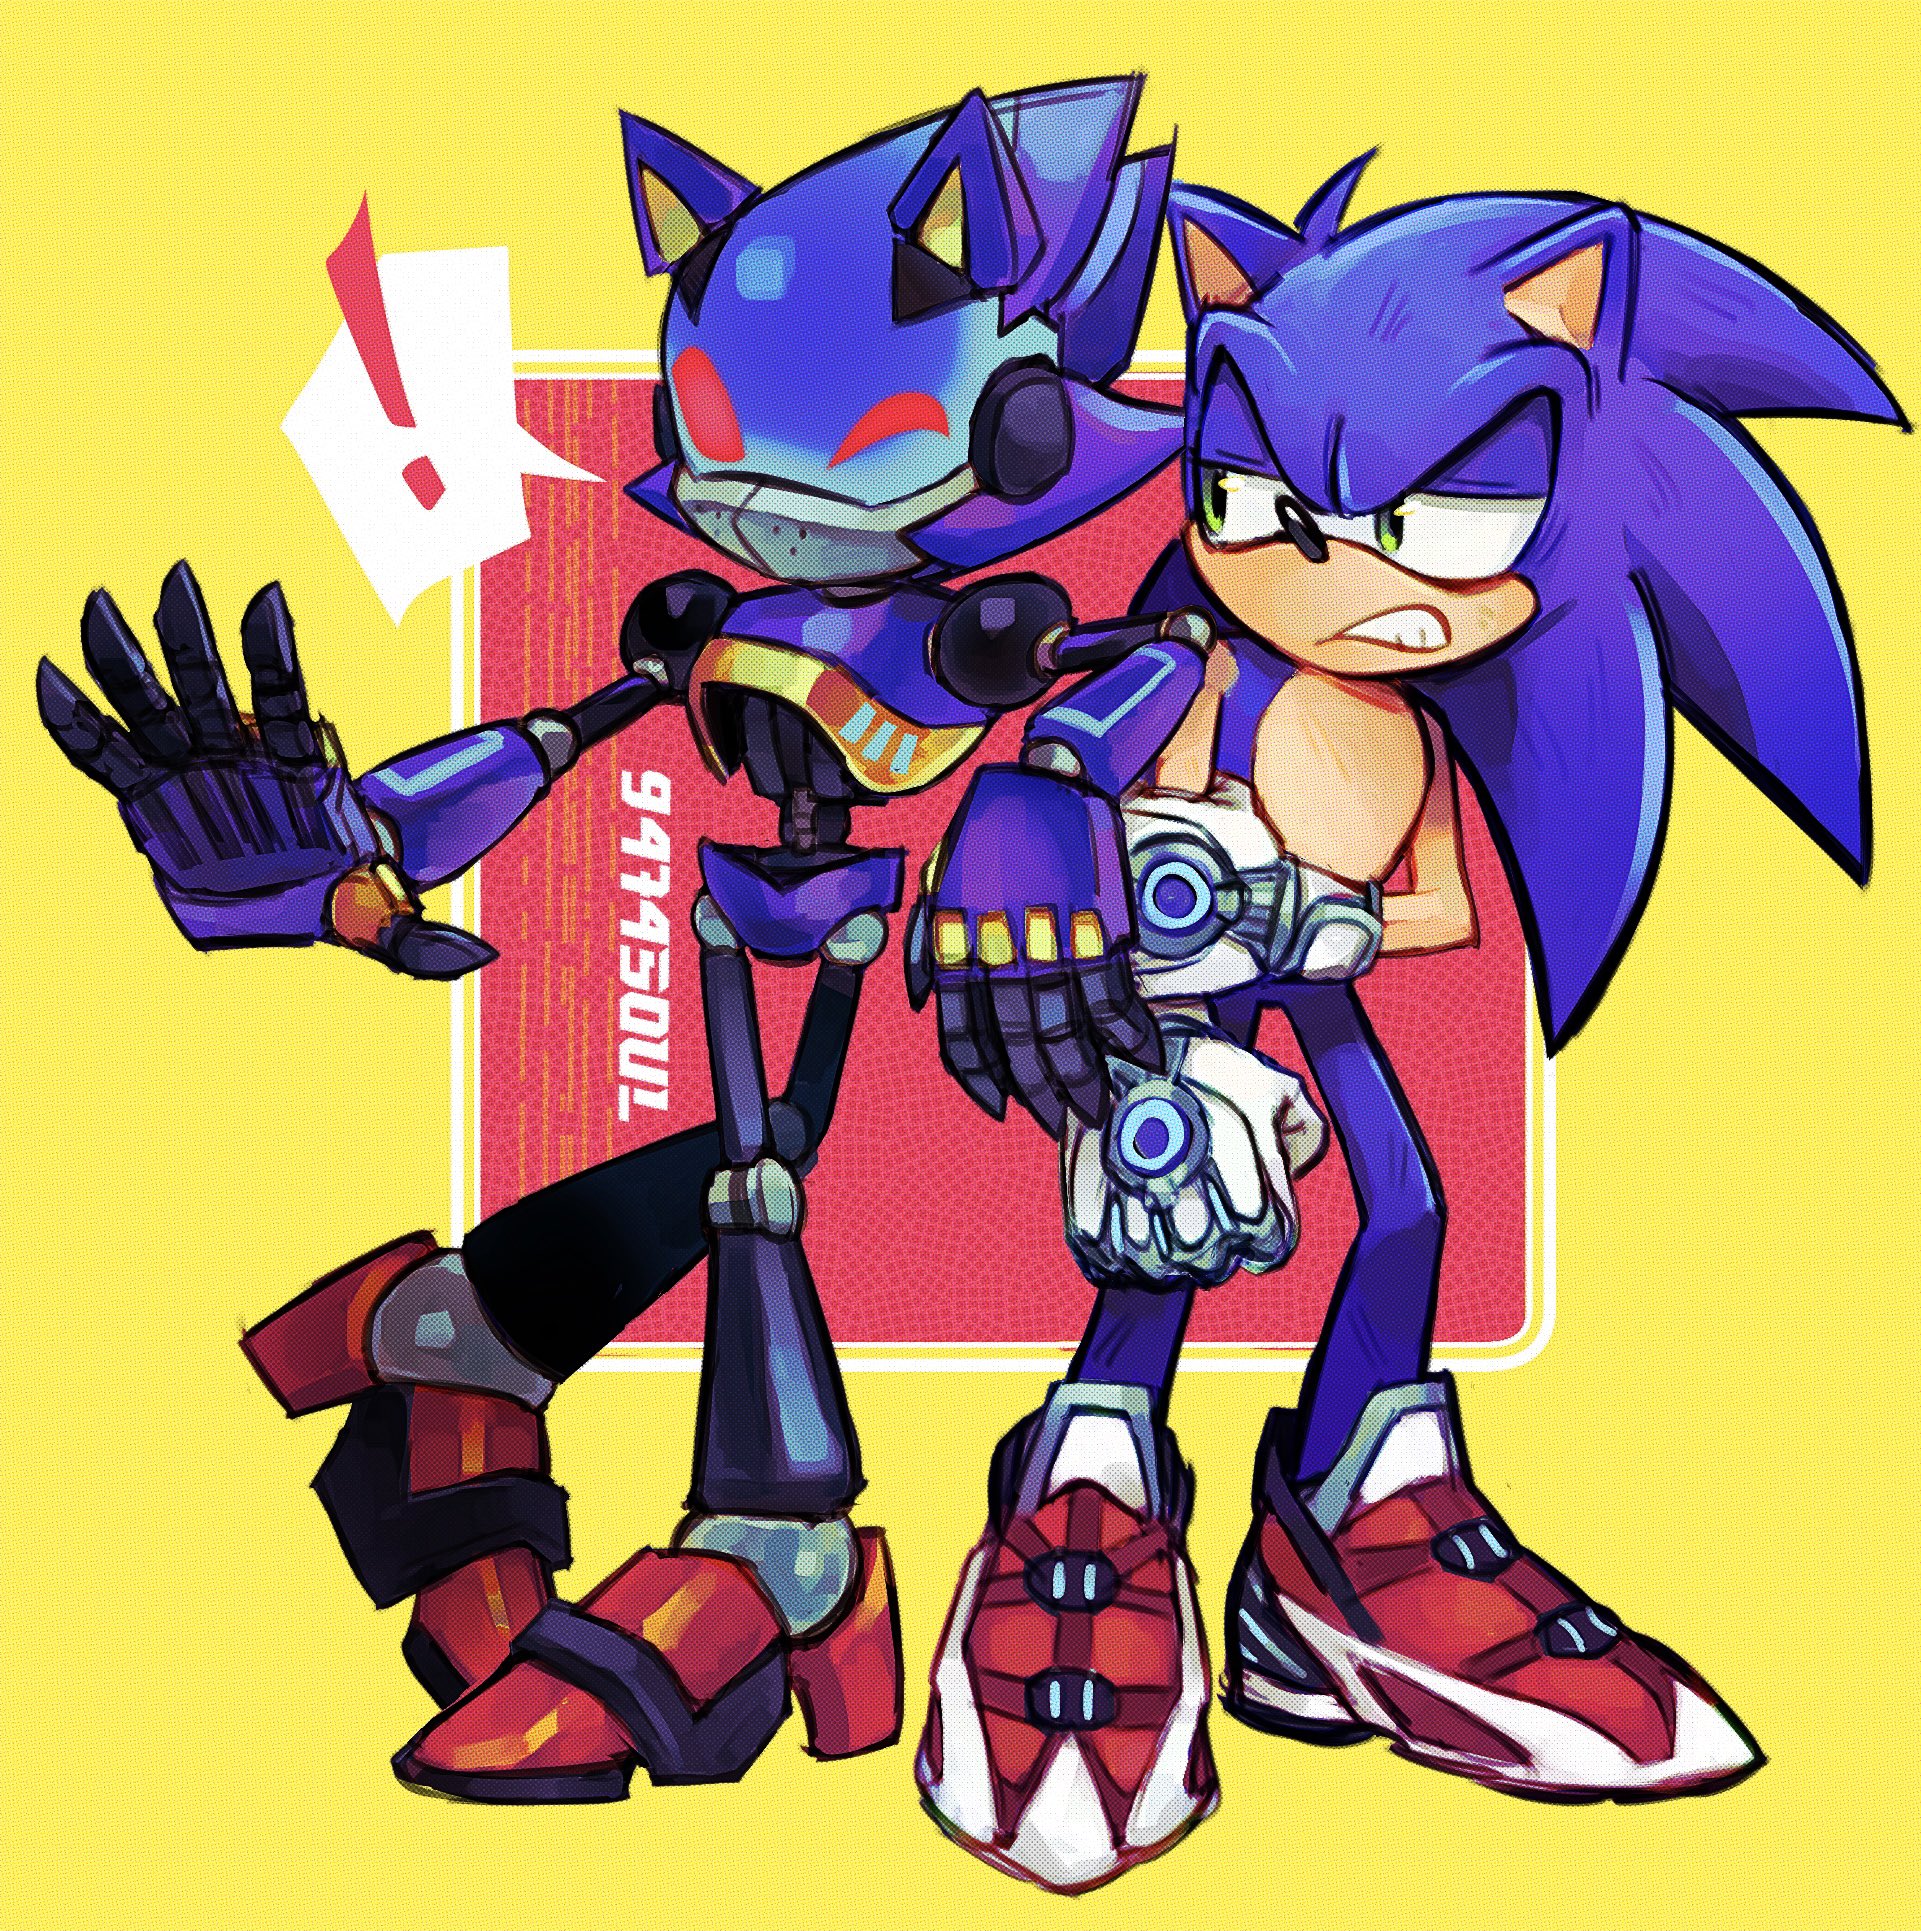 metal sonic and chaos sonic (sonic and 1 more) drawn by chicobrrr